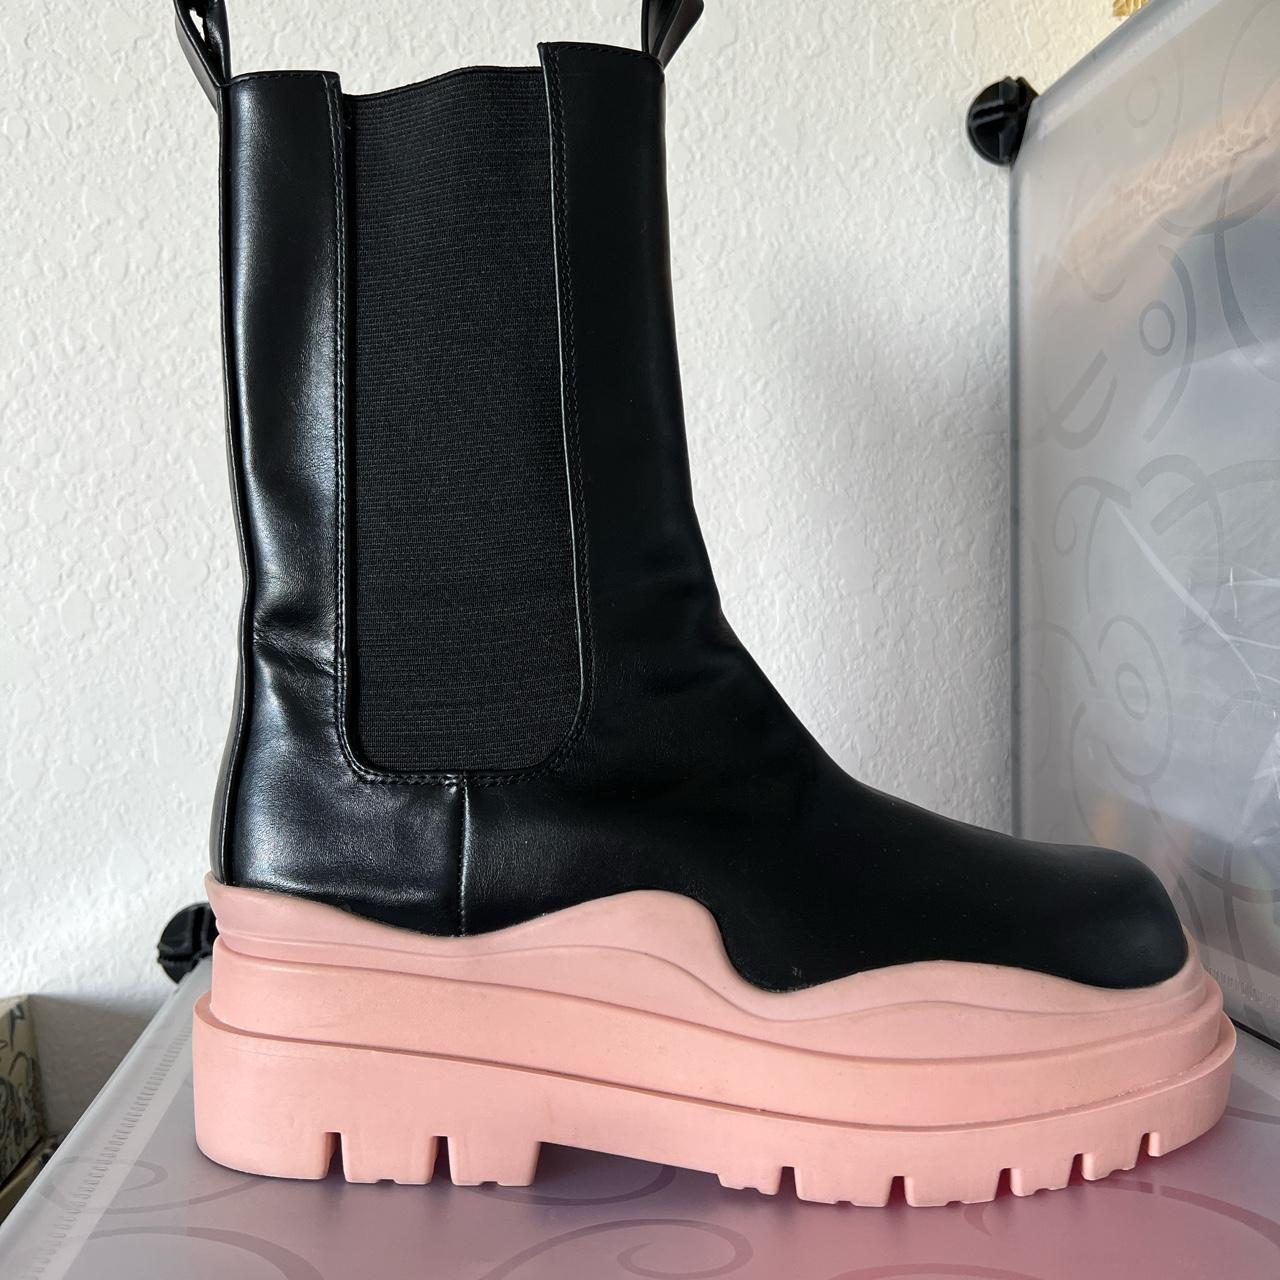 Product Image 1 - Chunky sole boots pink, very